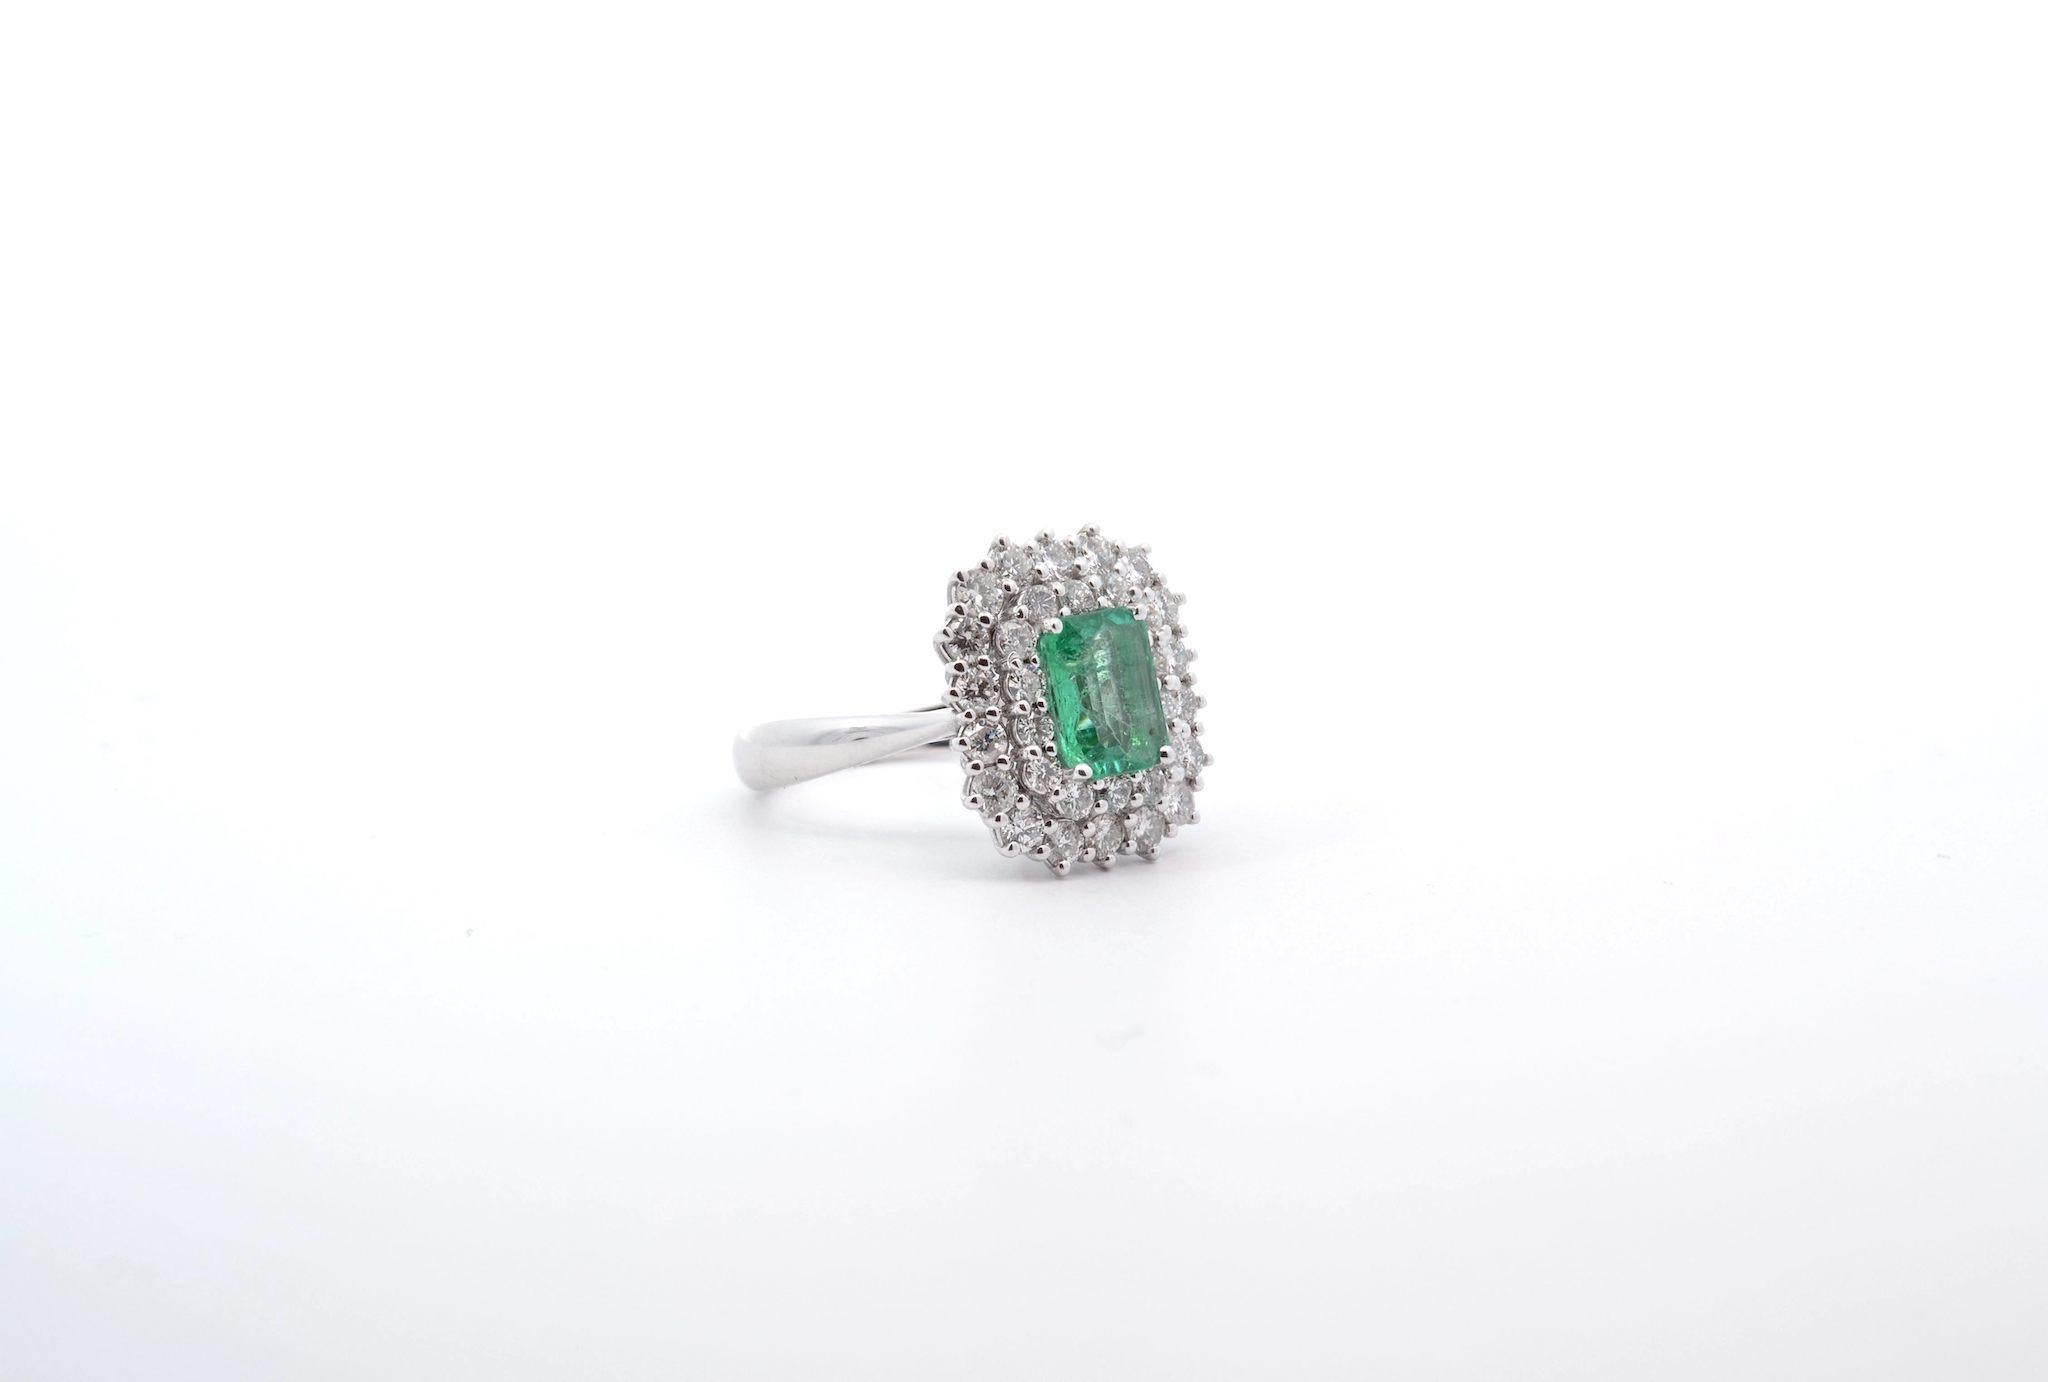 Emerald Cut 1970 vintage ring with 1, 39 carats emerald and diamonds